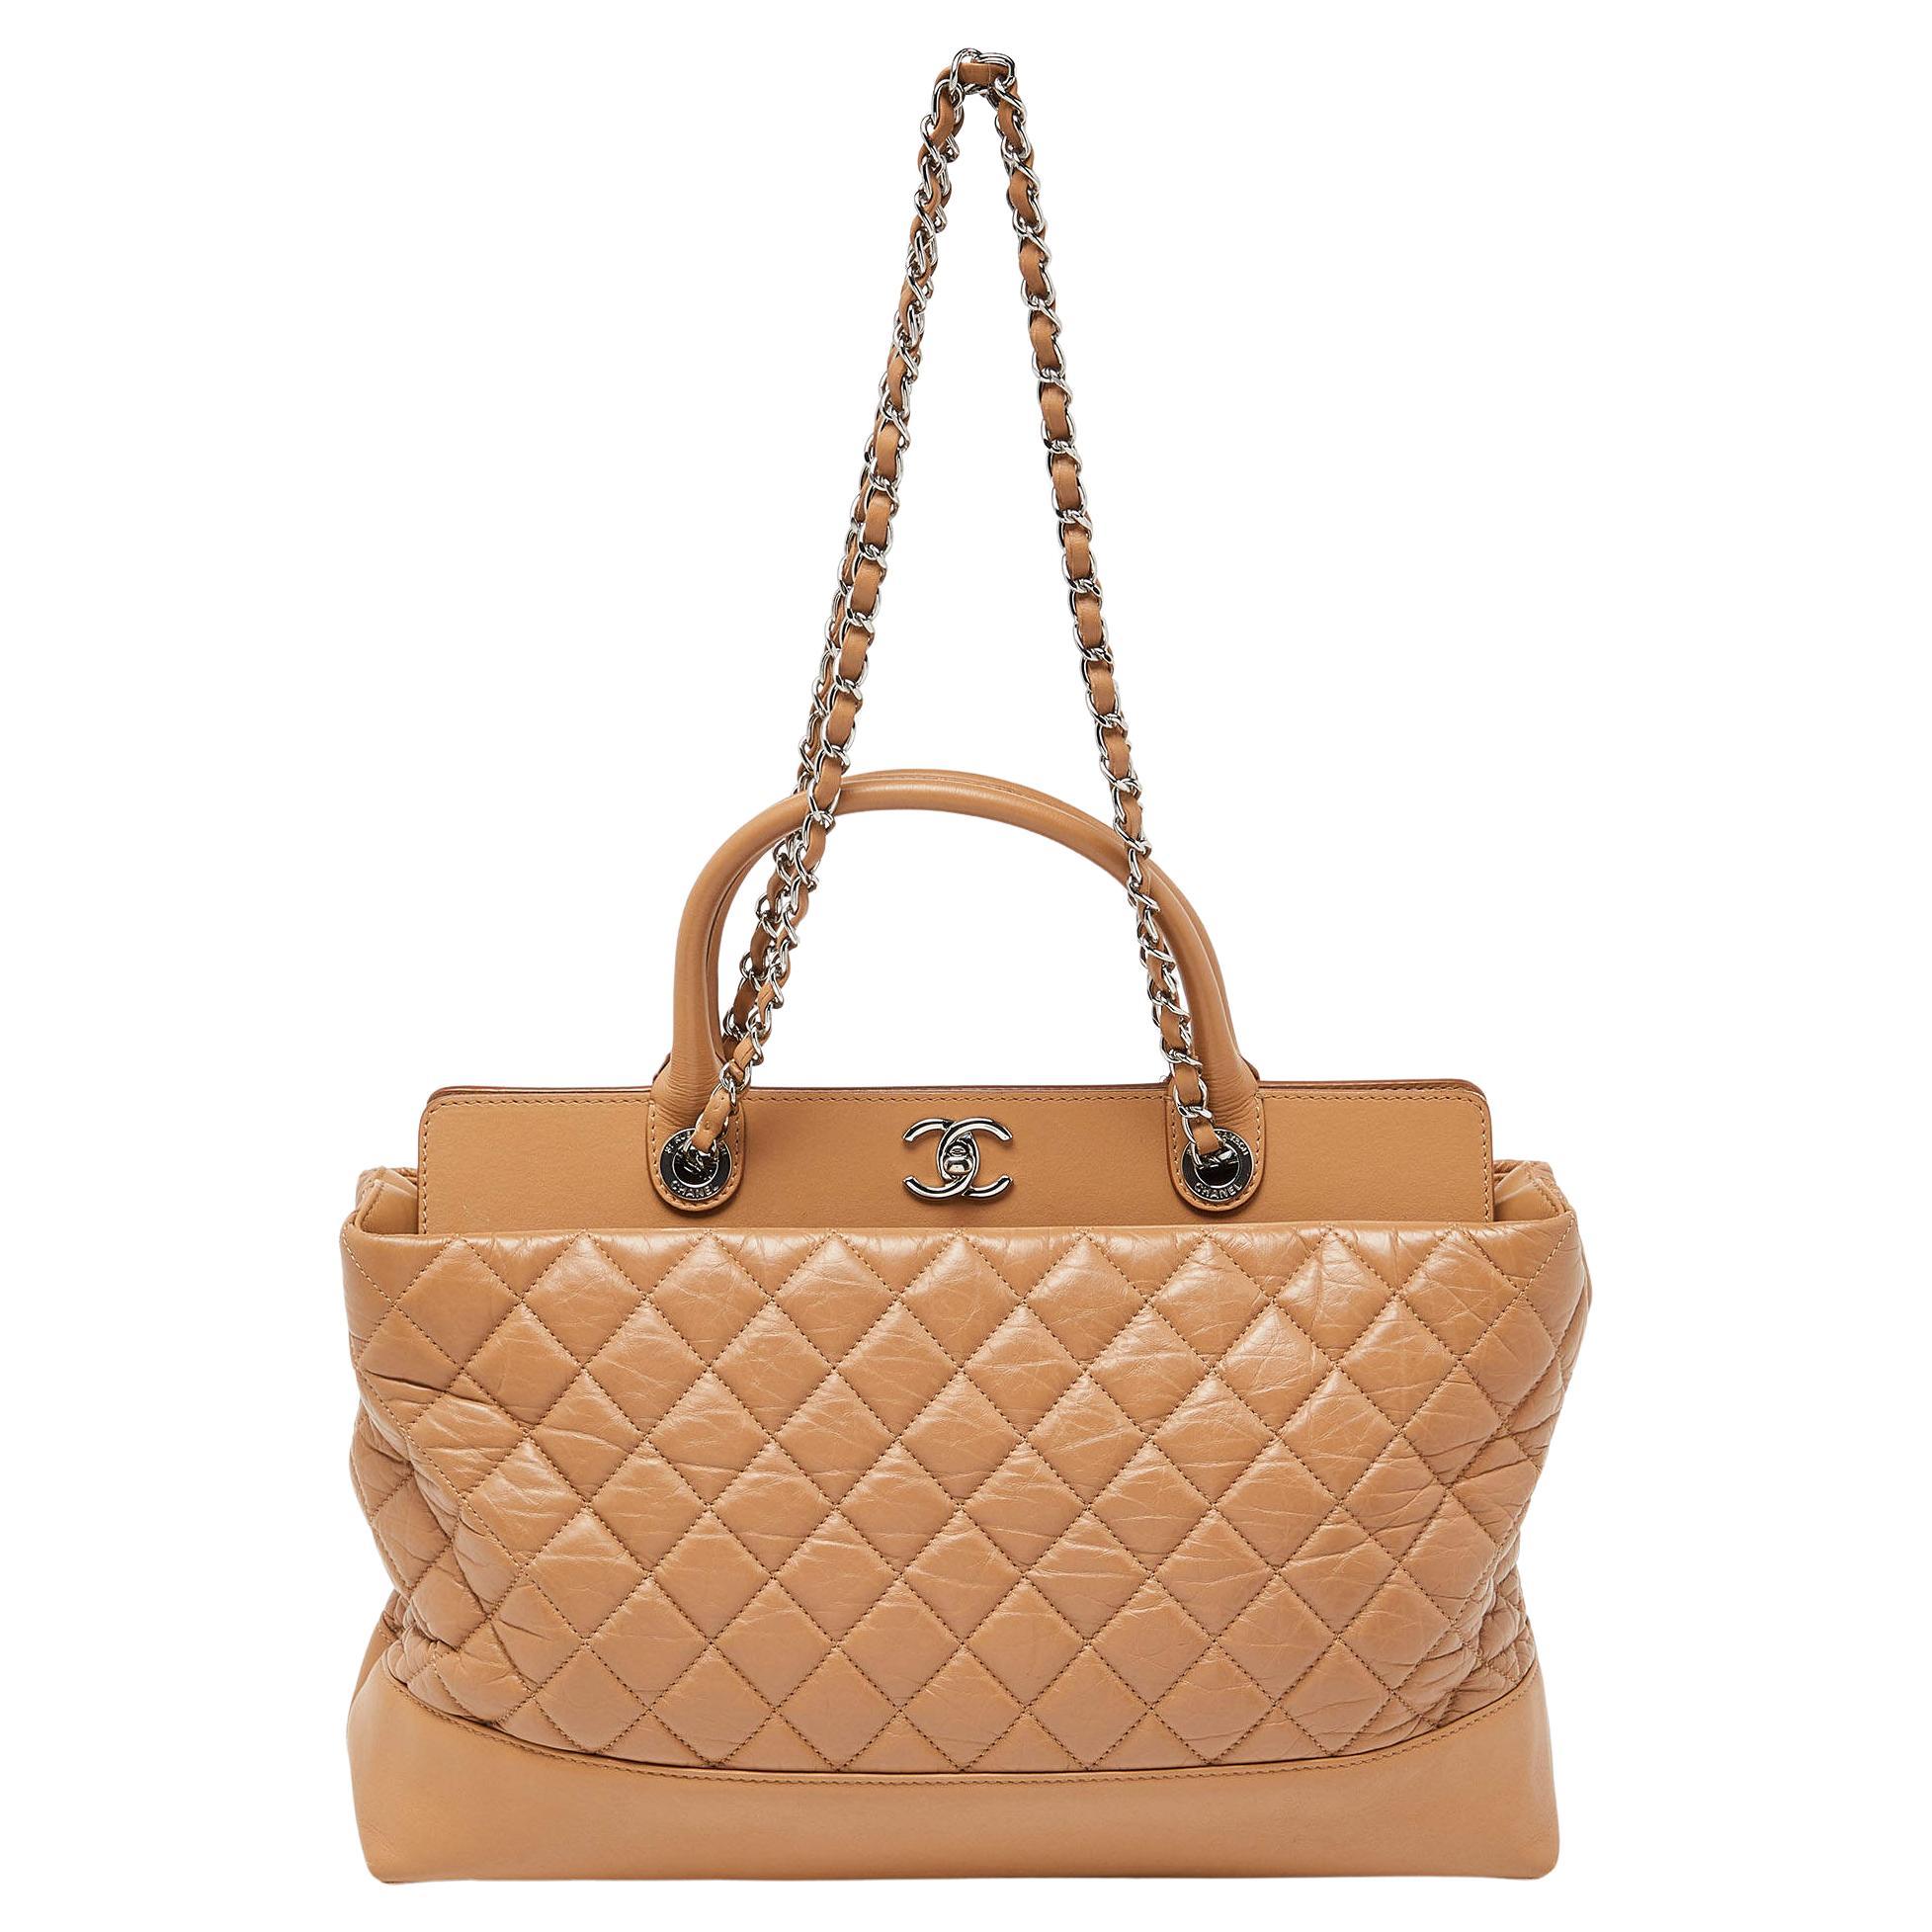 Chanel Beige Quilted Leather CC Shopper Tote For Sale